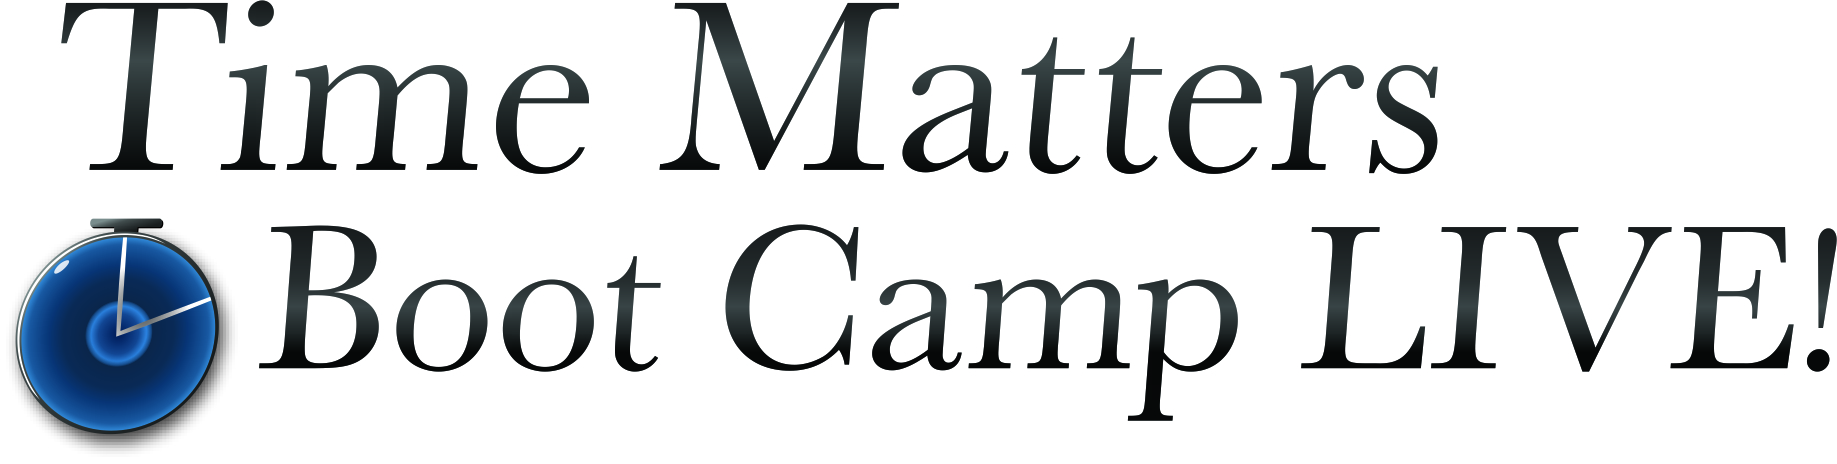 Time Matters Boot Camp Live Event Logo